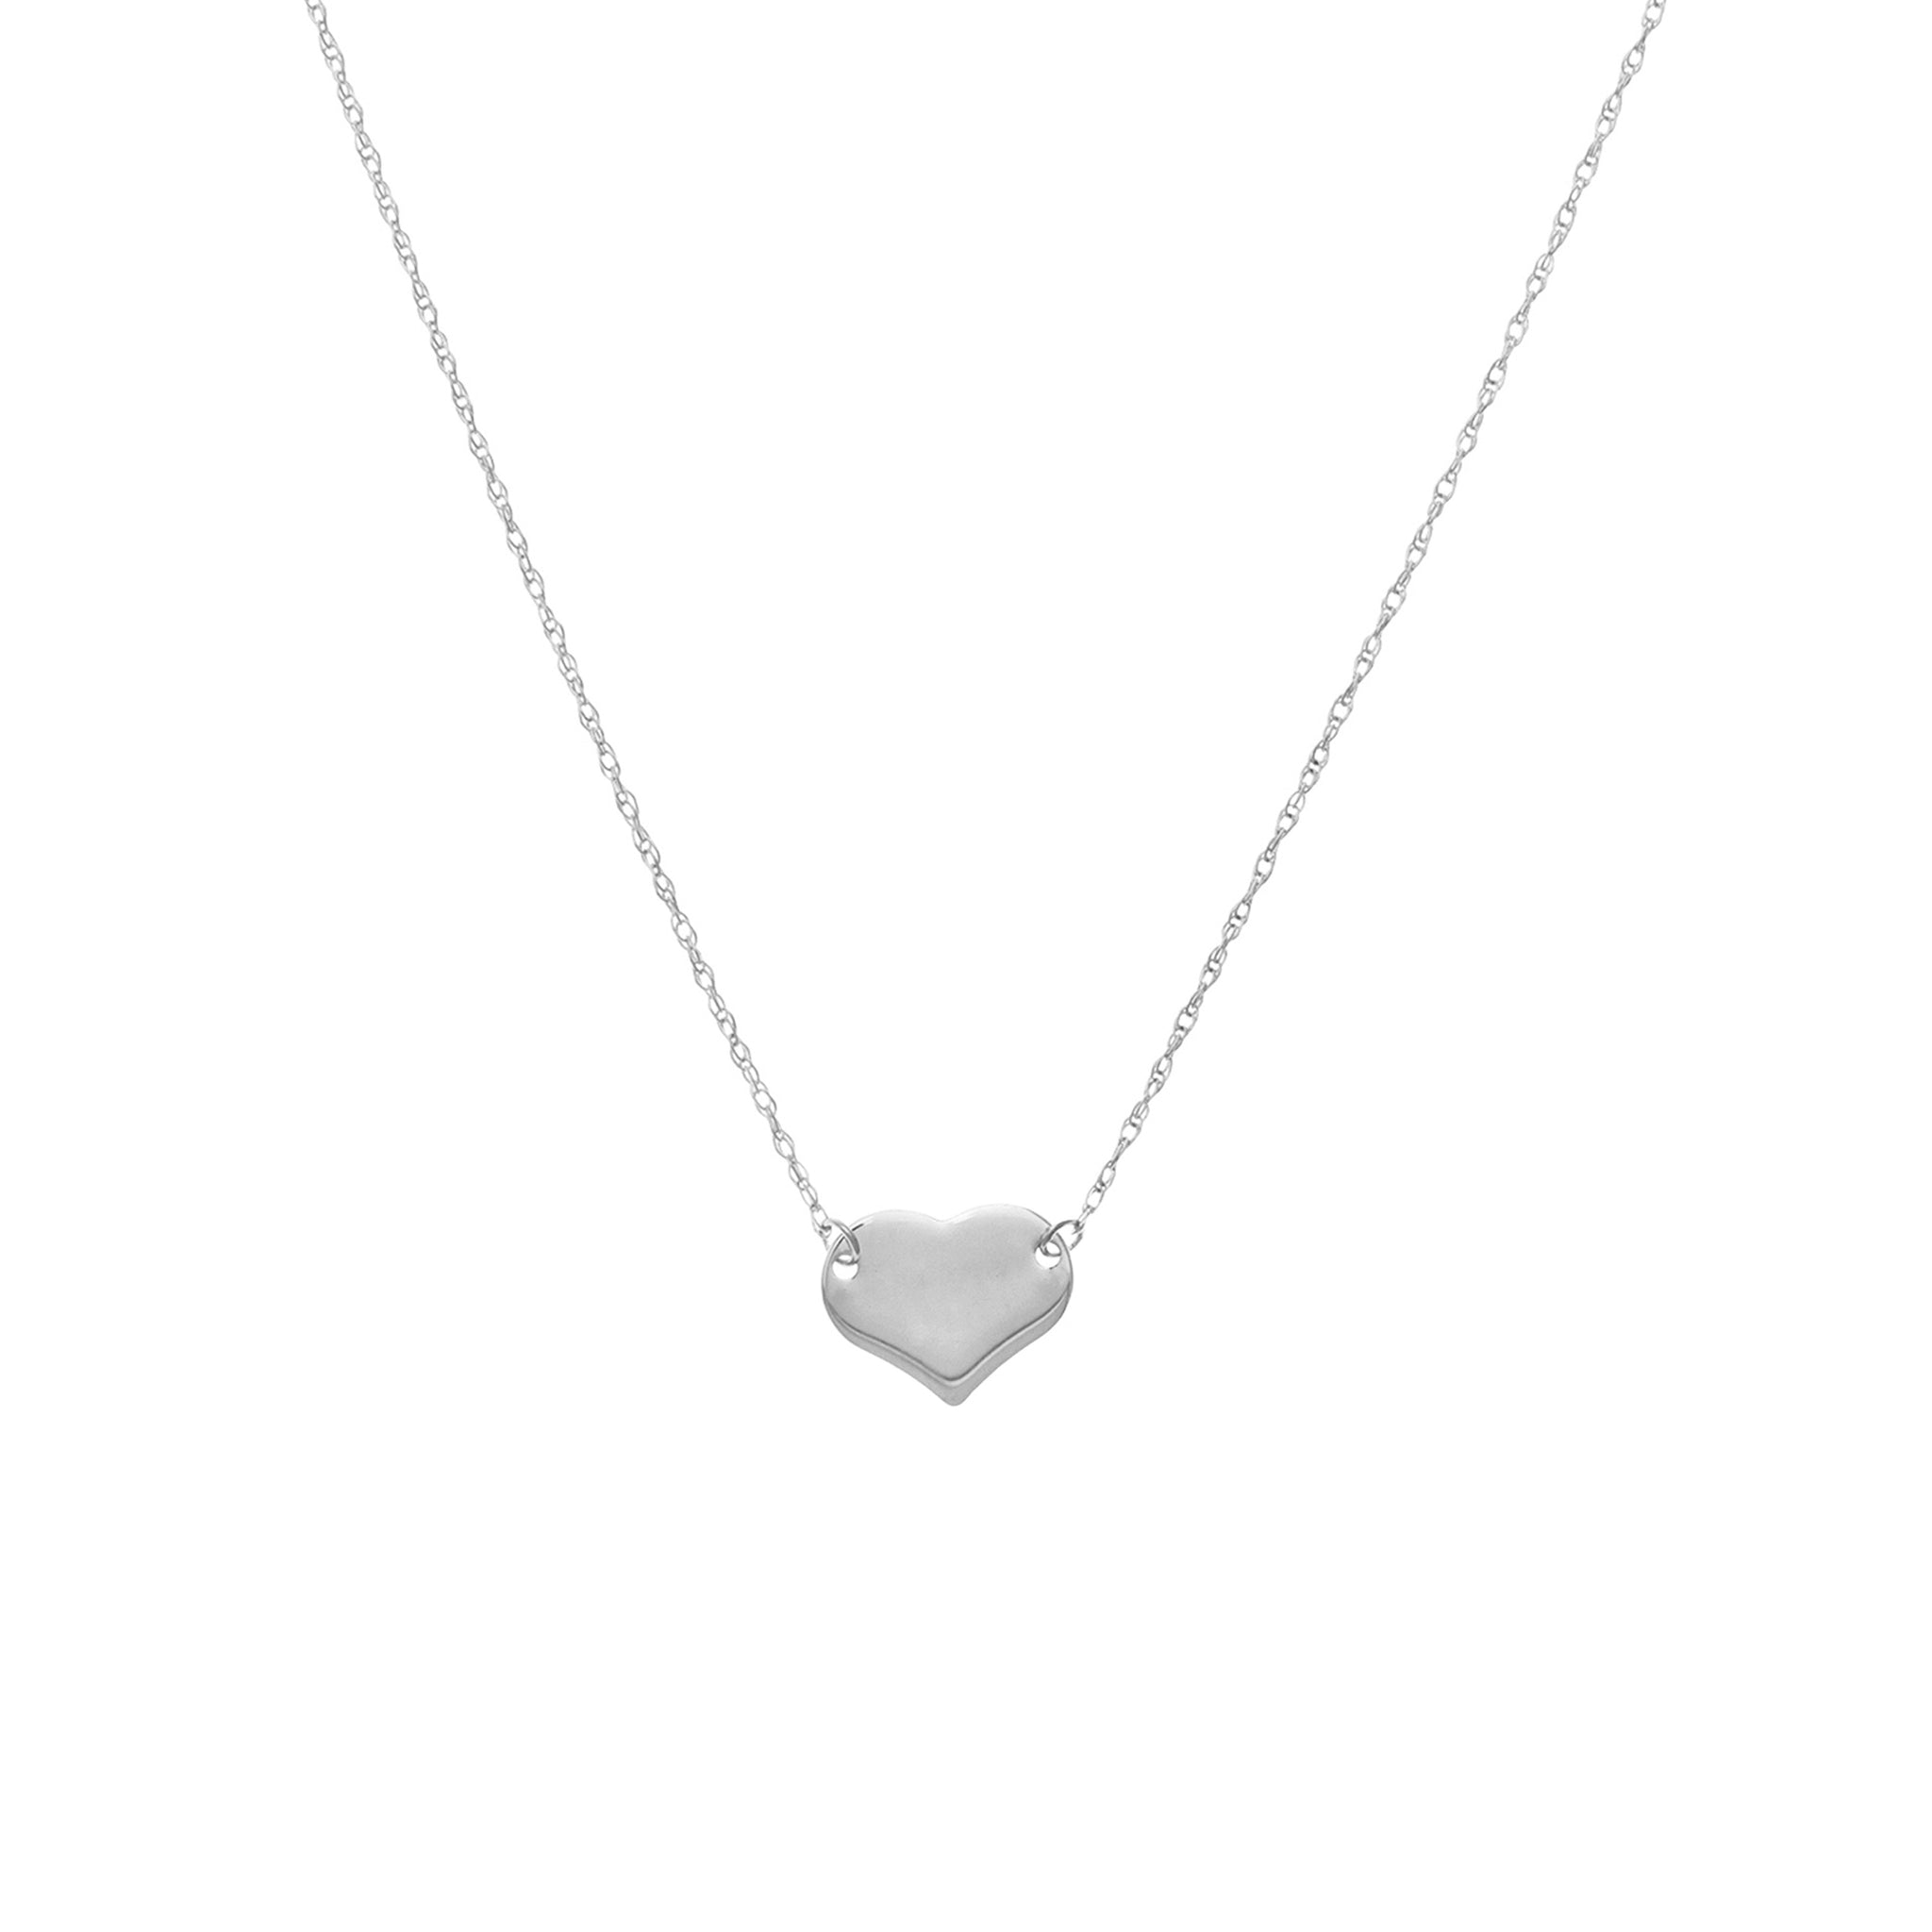 Hemsleys Collection 14K Heart-Shaped Disc Necklace